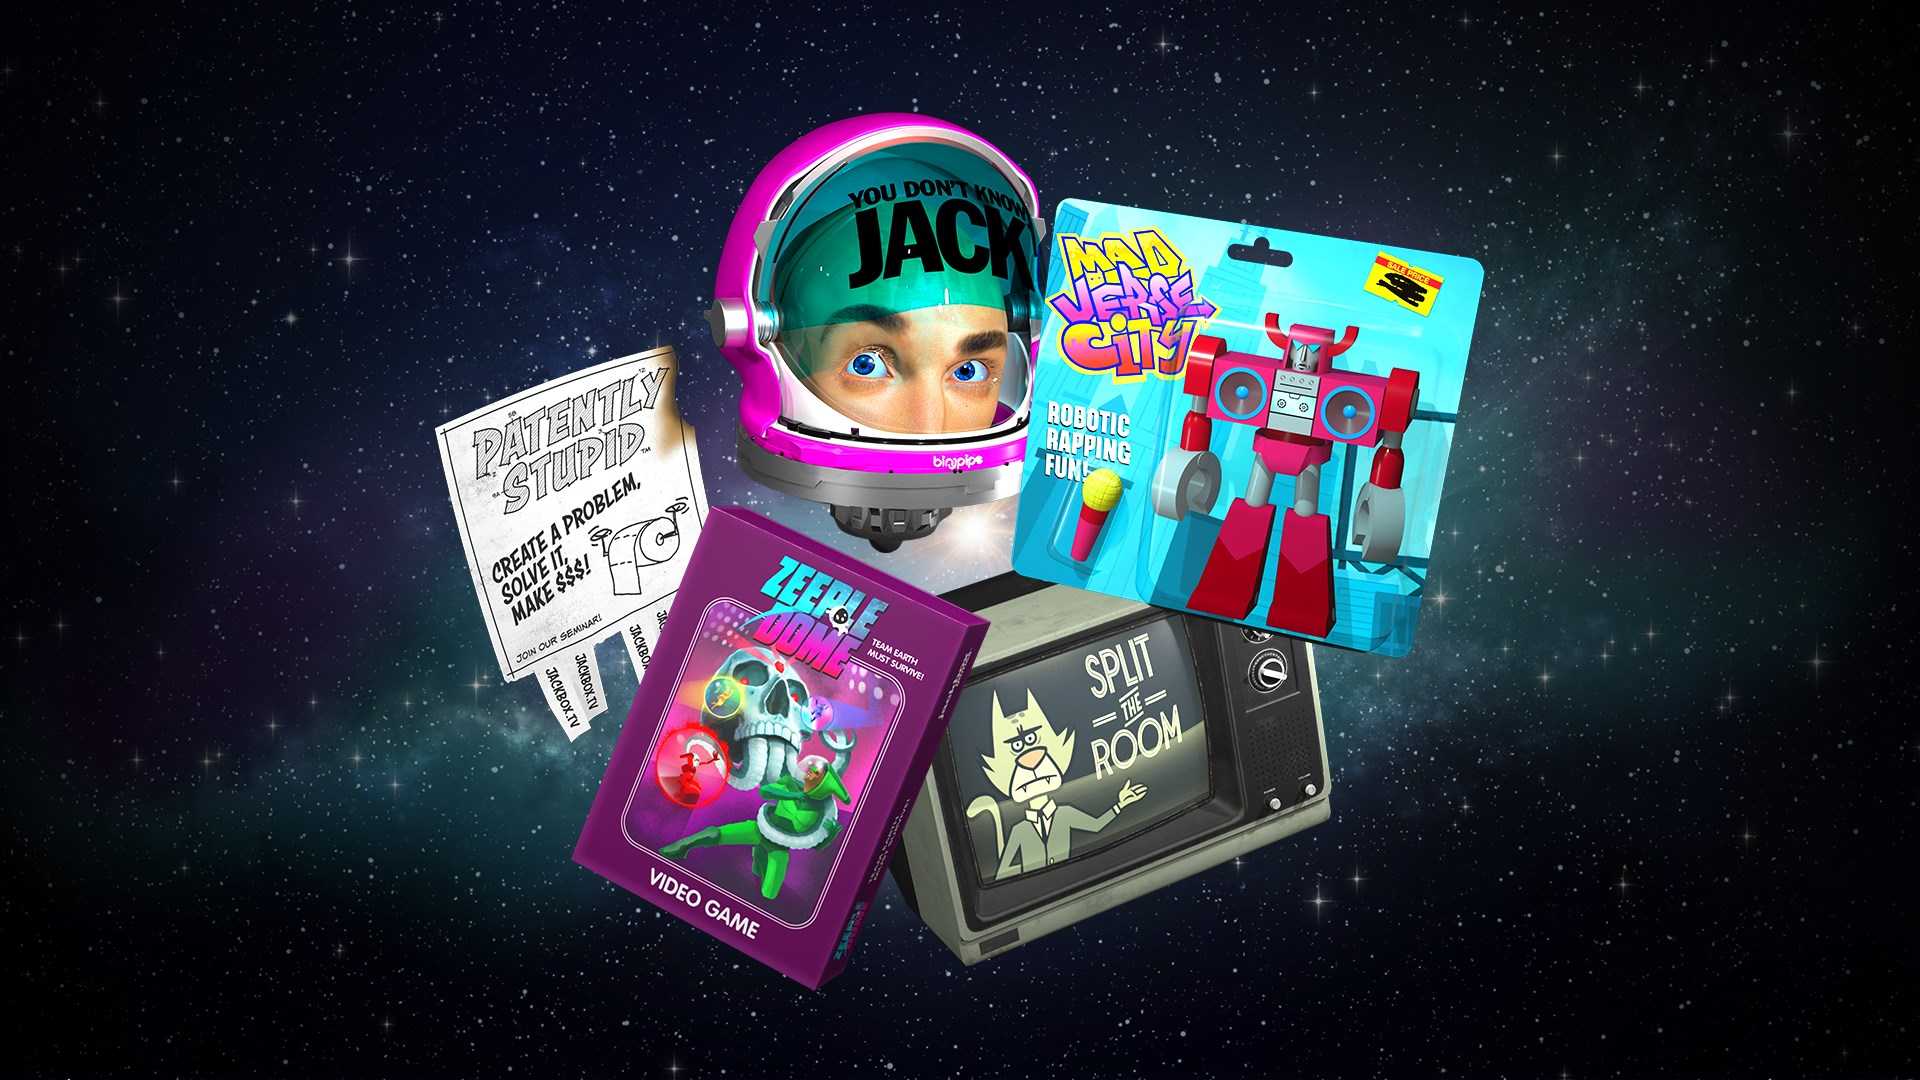 the jackbox party pack 5 xbox one